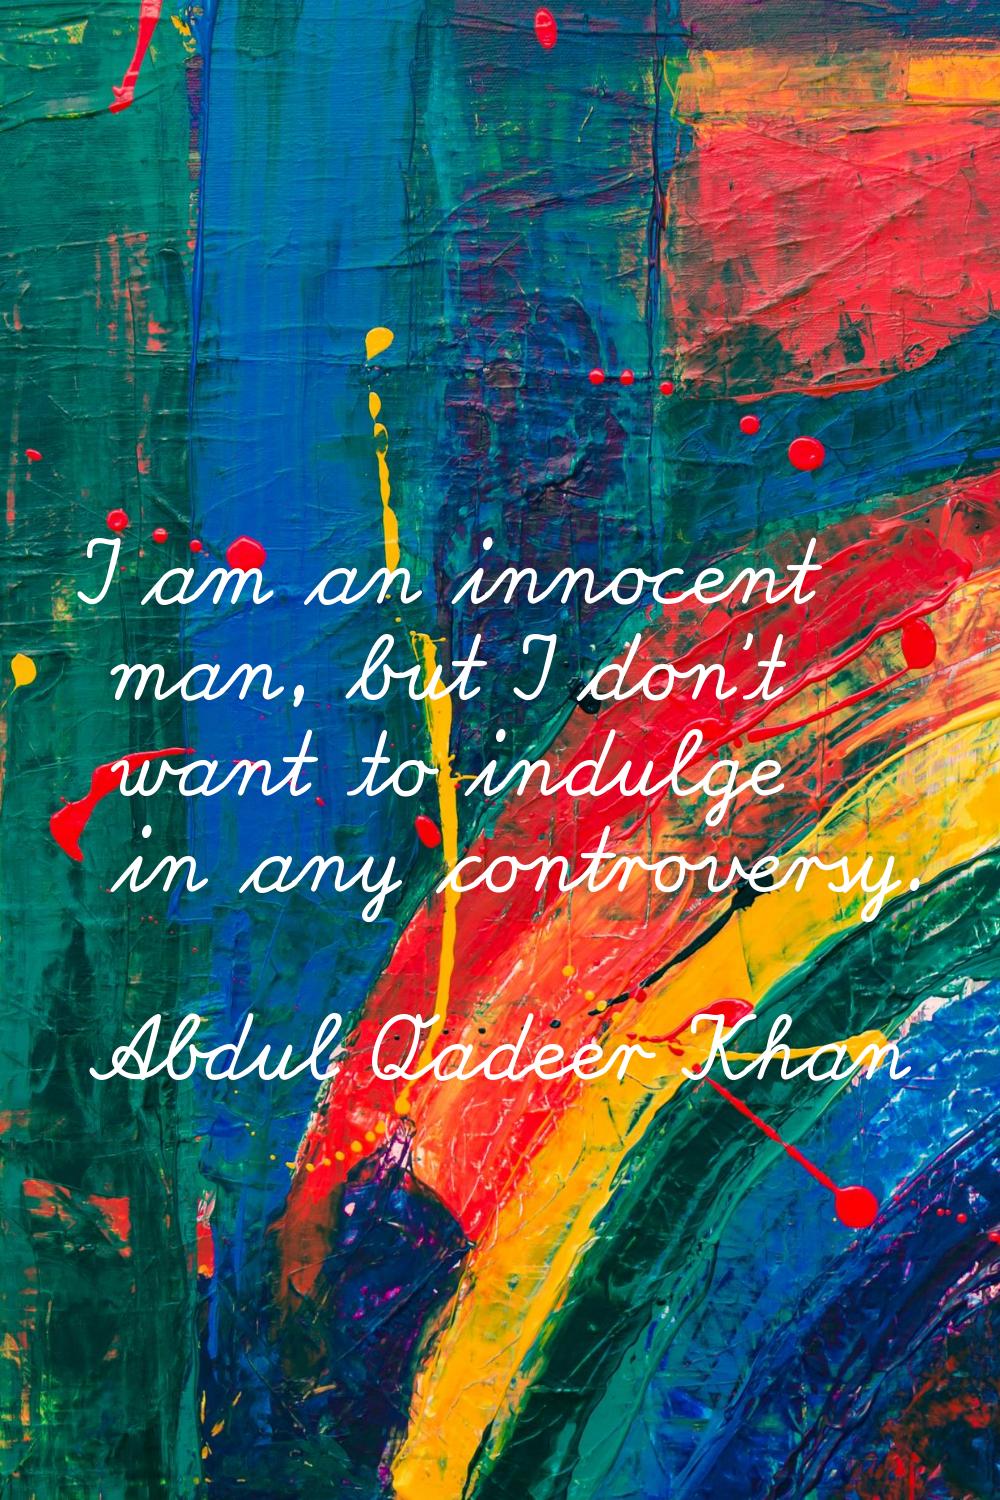 I am an innocent man, but I don't want to indulge in any controversy.